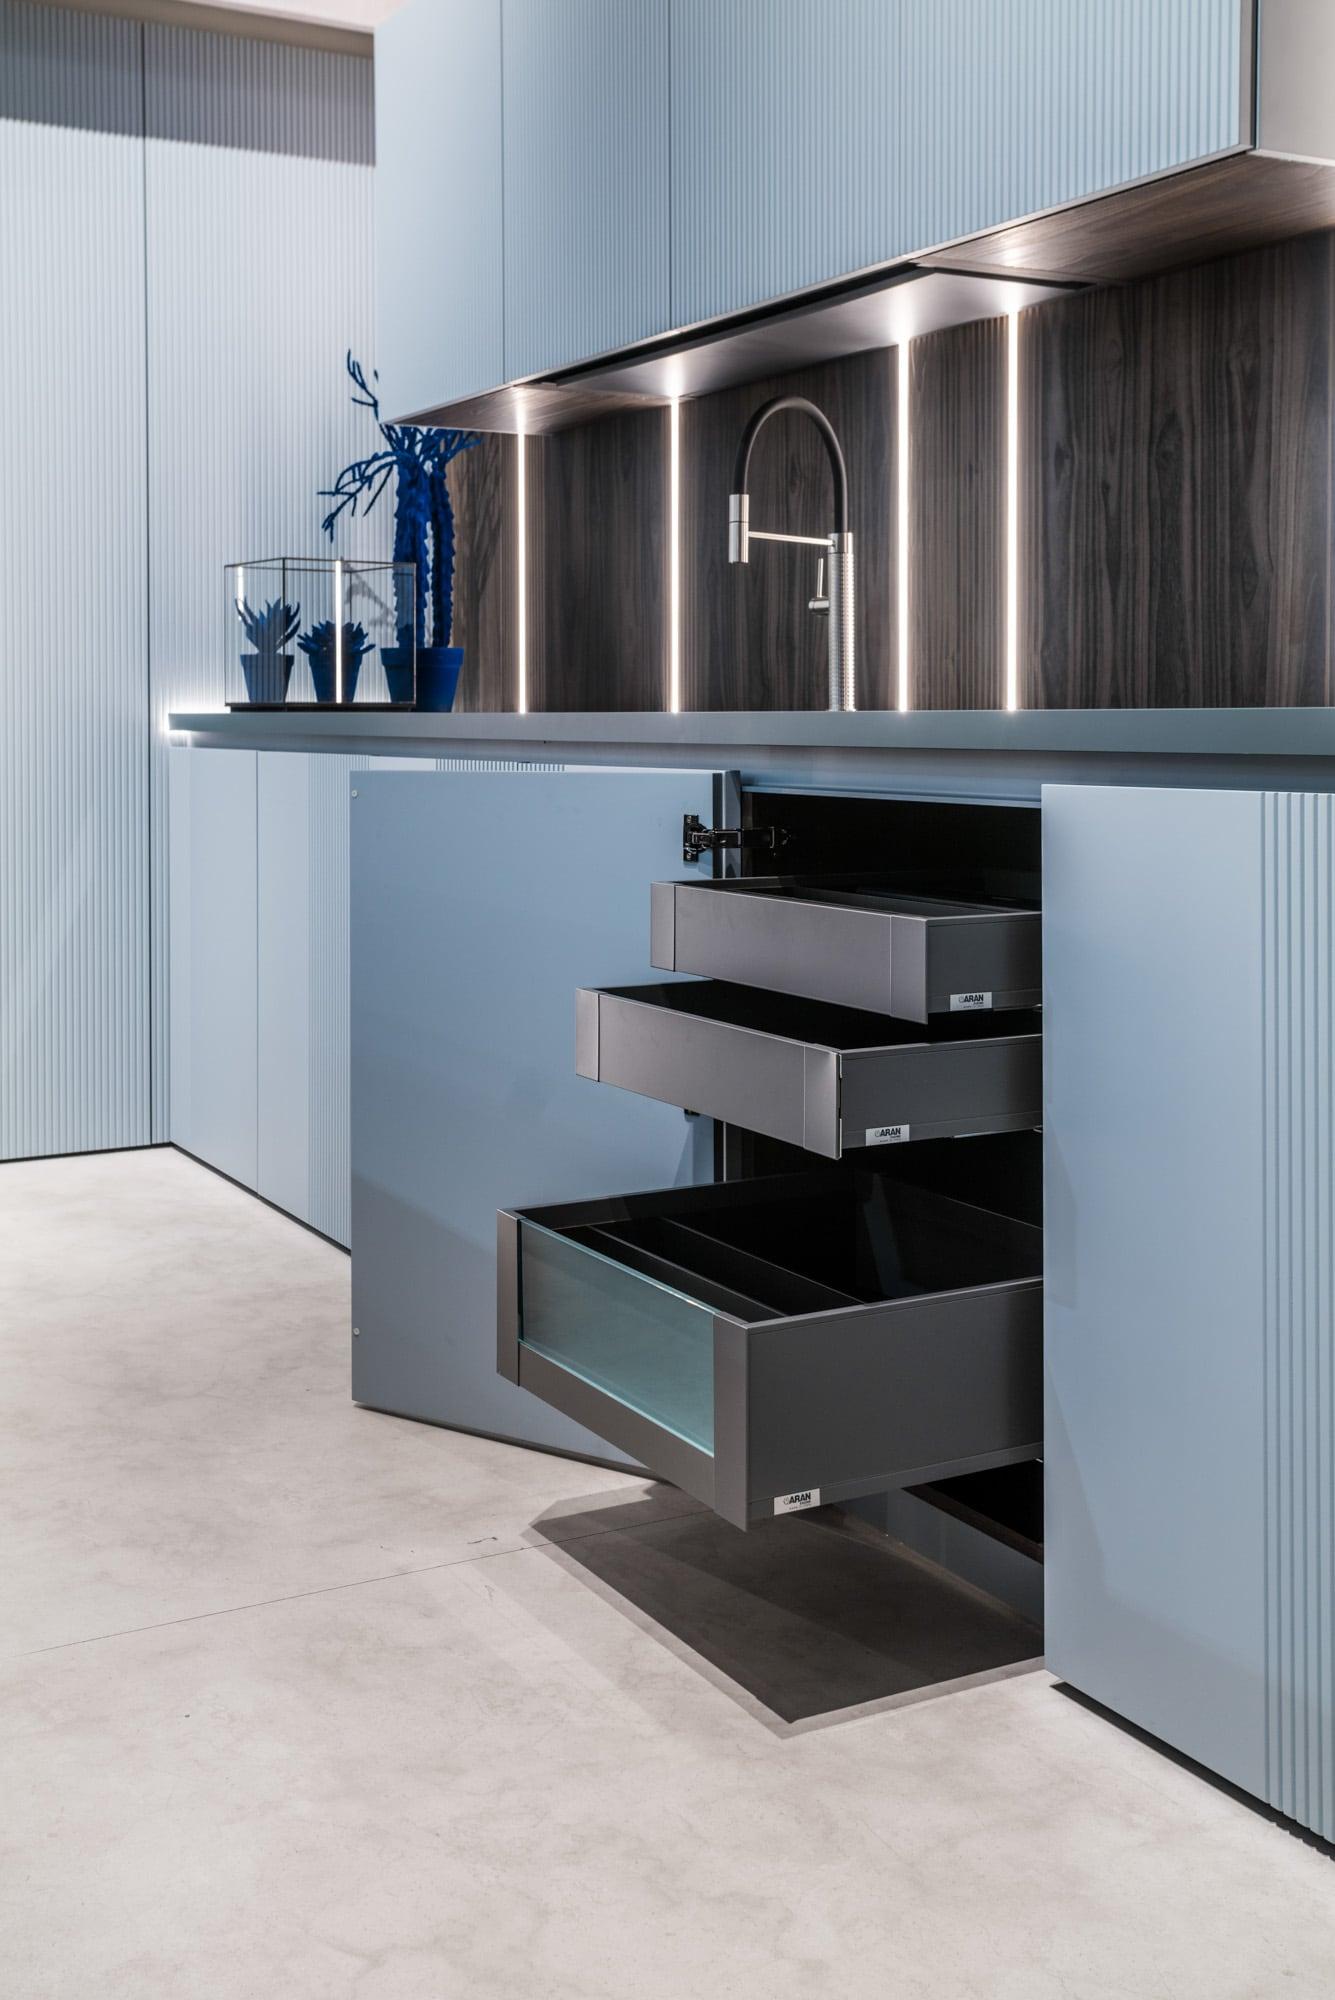 Implemented with LEGRABOX Seen at ARAN Cucine